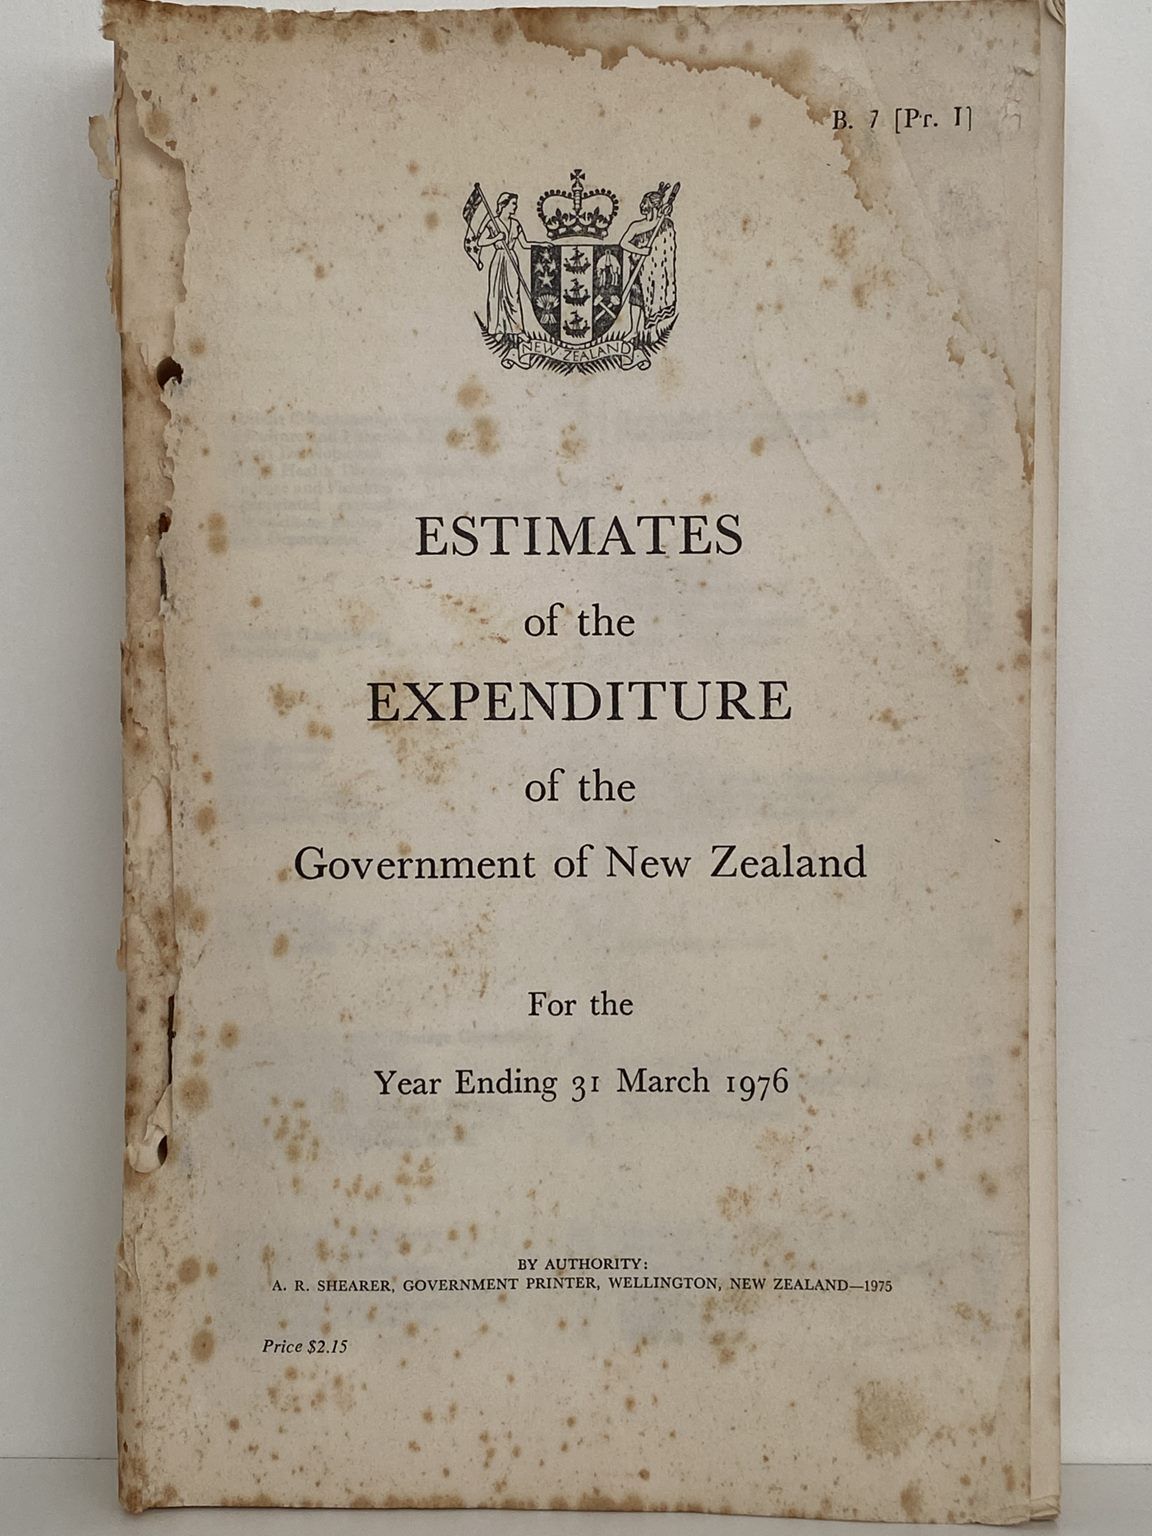 ESTIMATES of the EXPENDITURE of the GOVERMENT of NEW ZEALAND March 1976